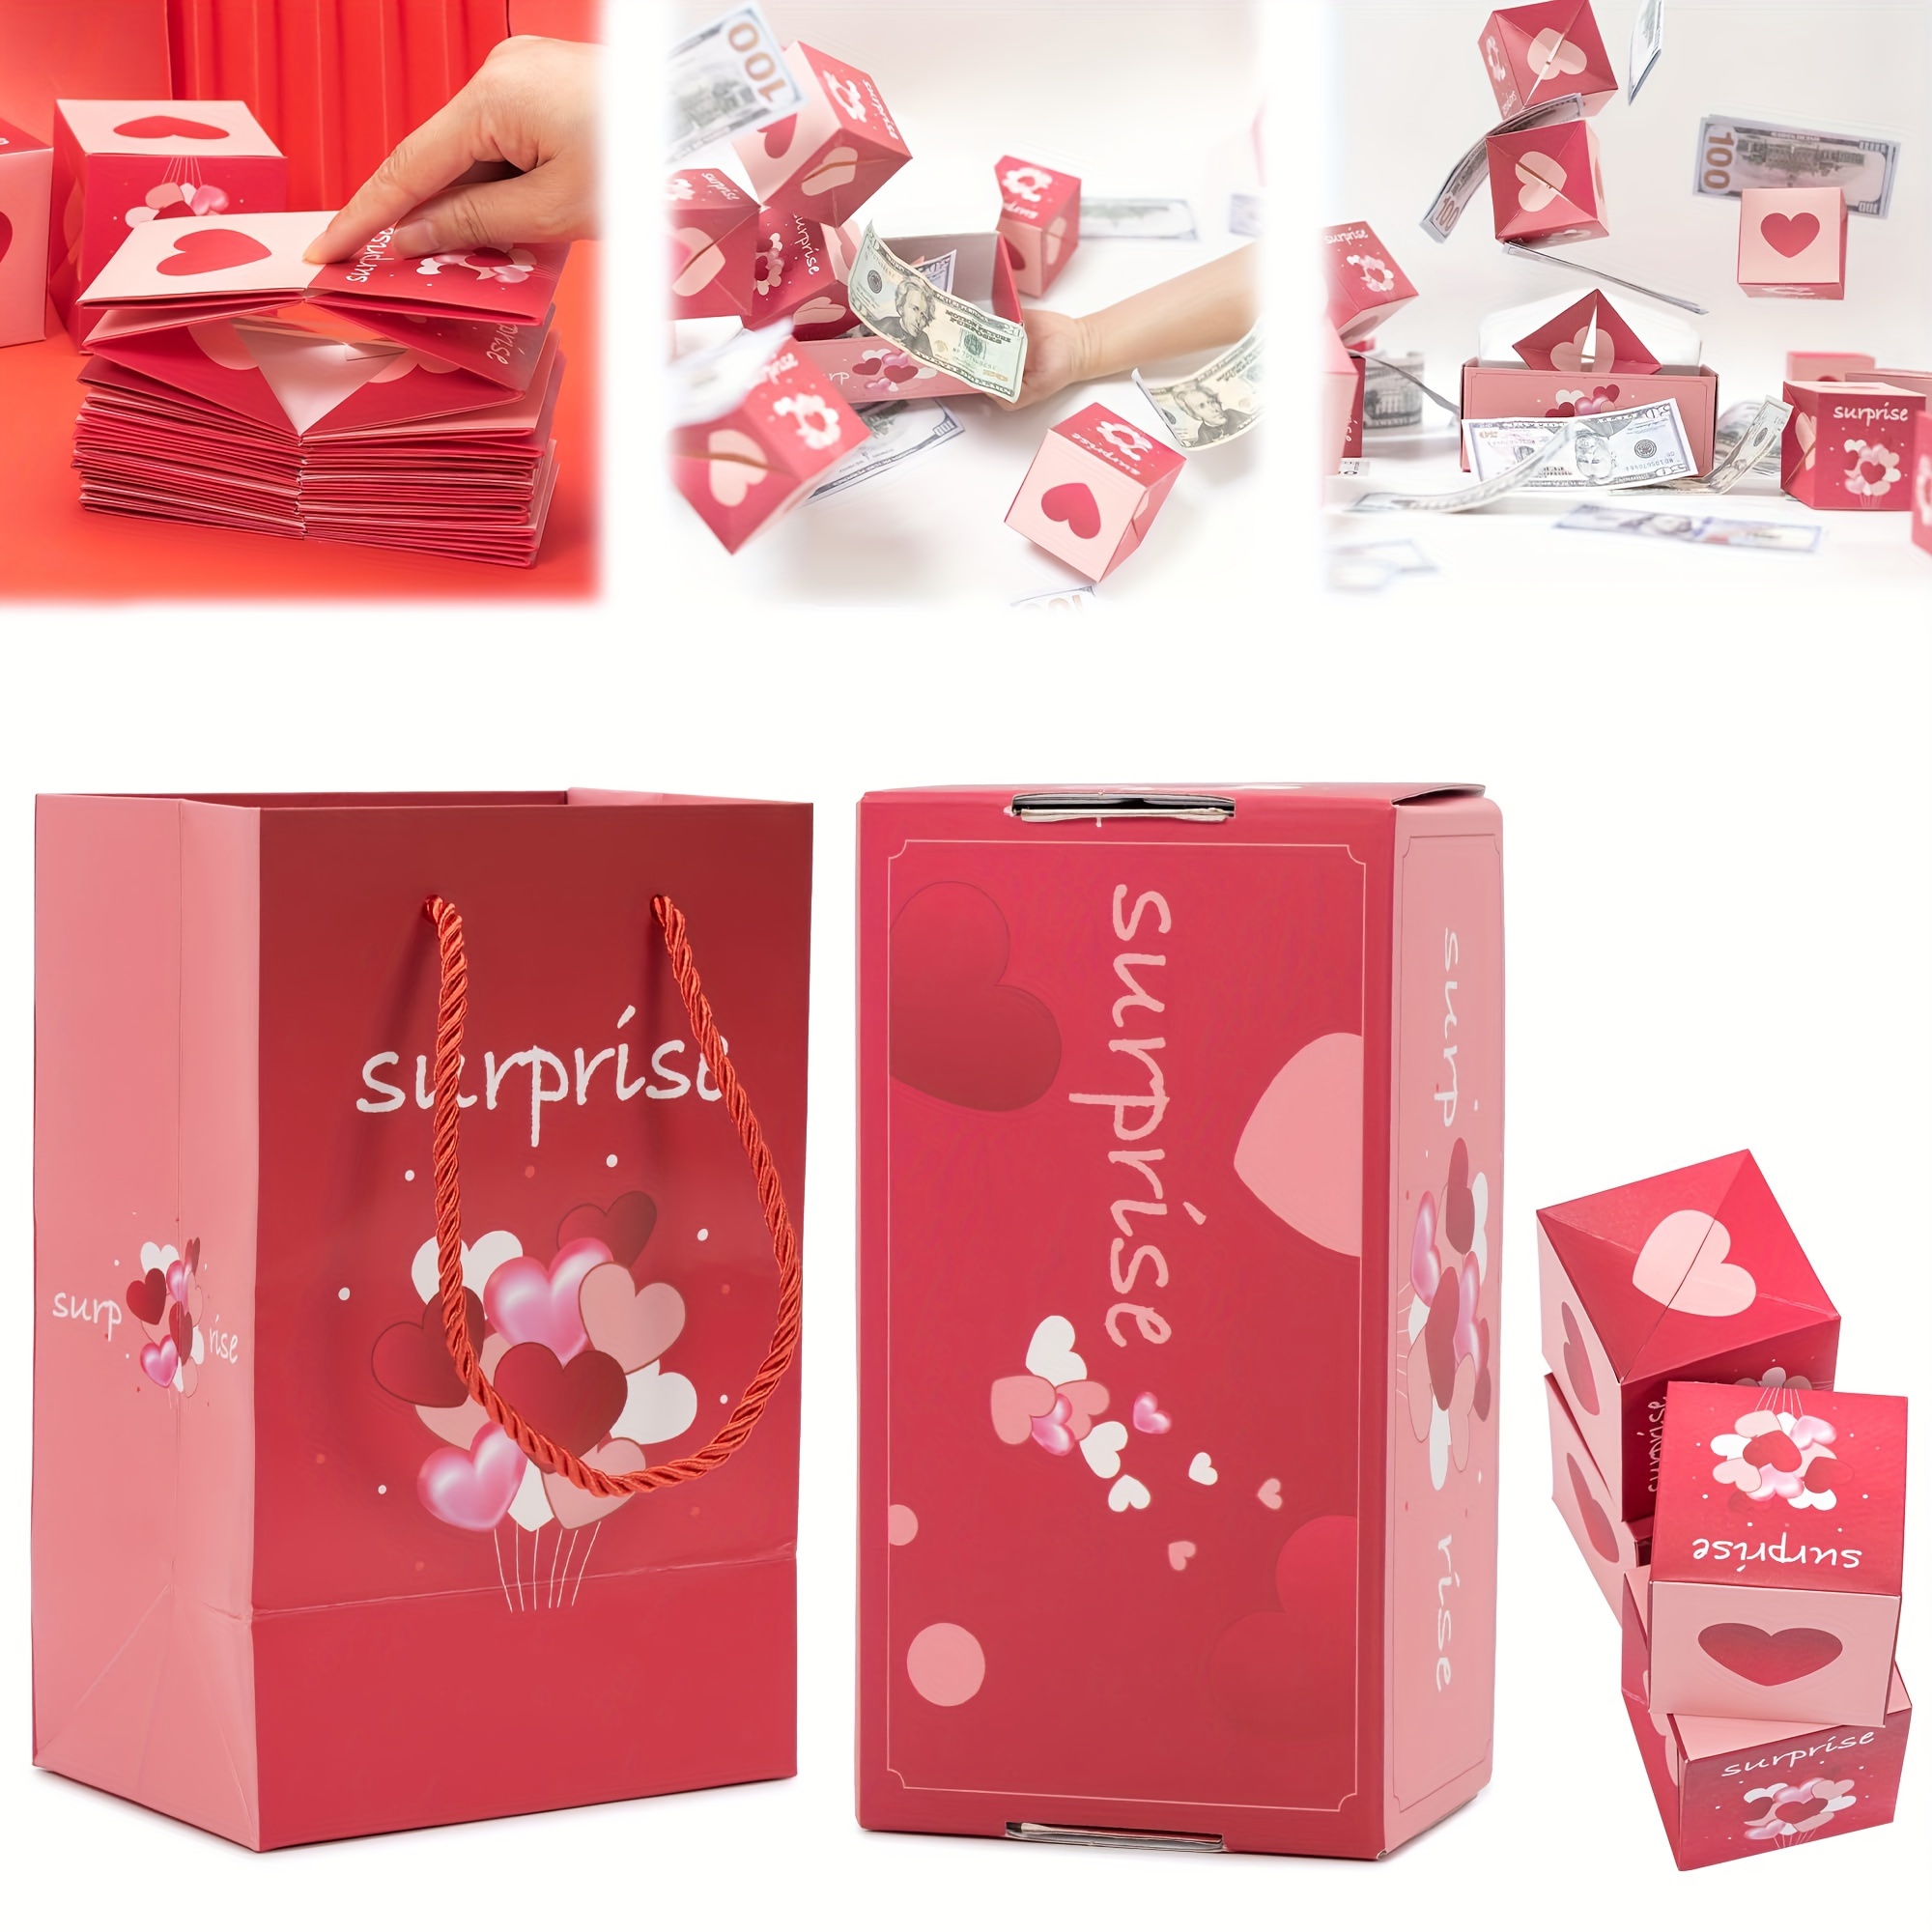 Surprise Gift Box Explosion For Money, Unique Folding Bouncing Red